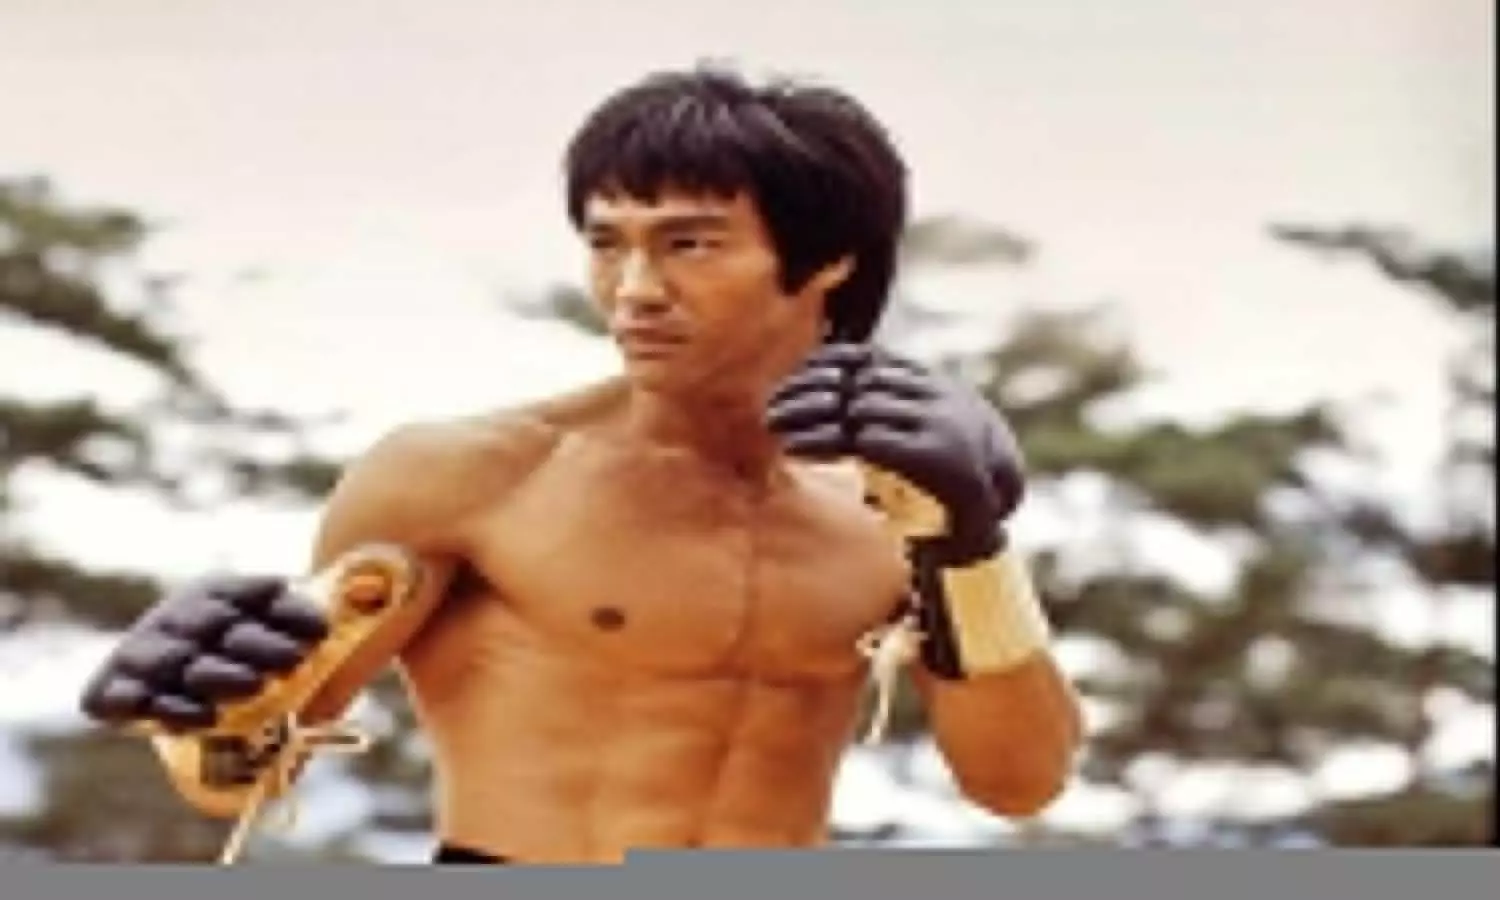 Bruce Lee death mystery resolved